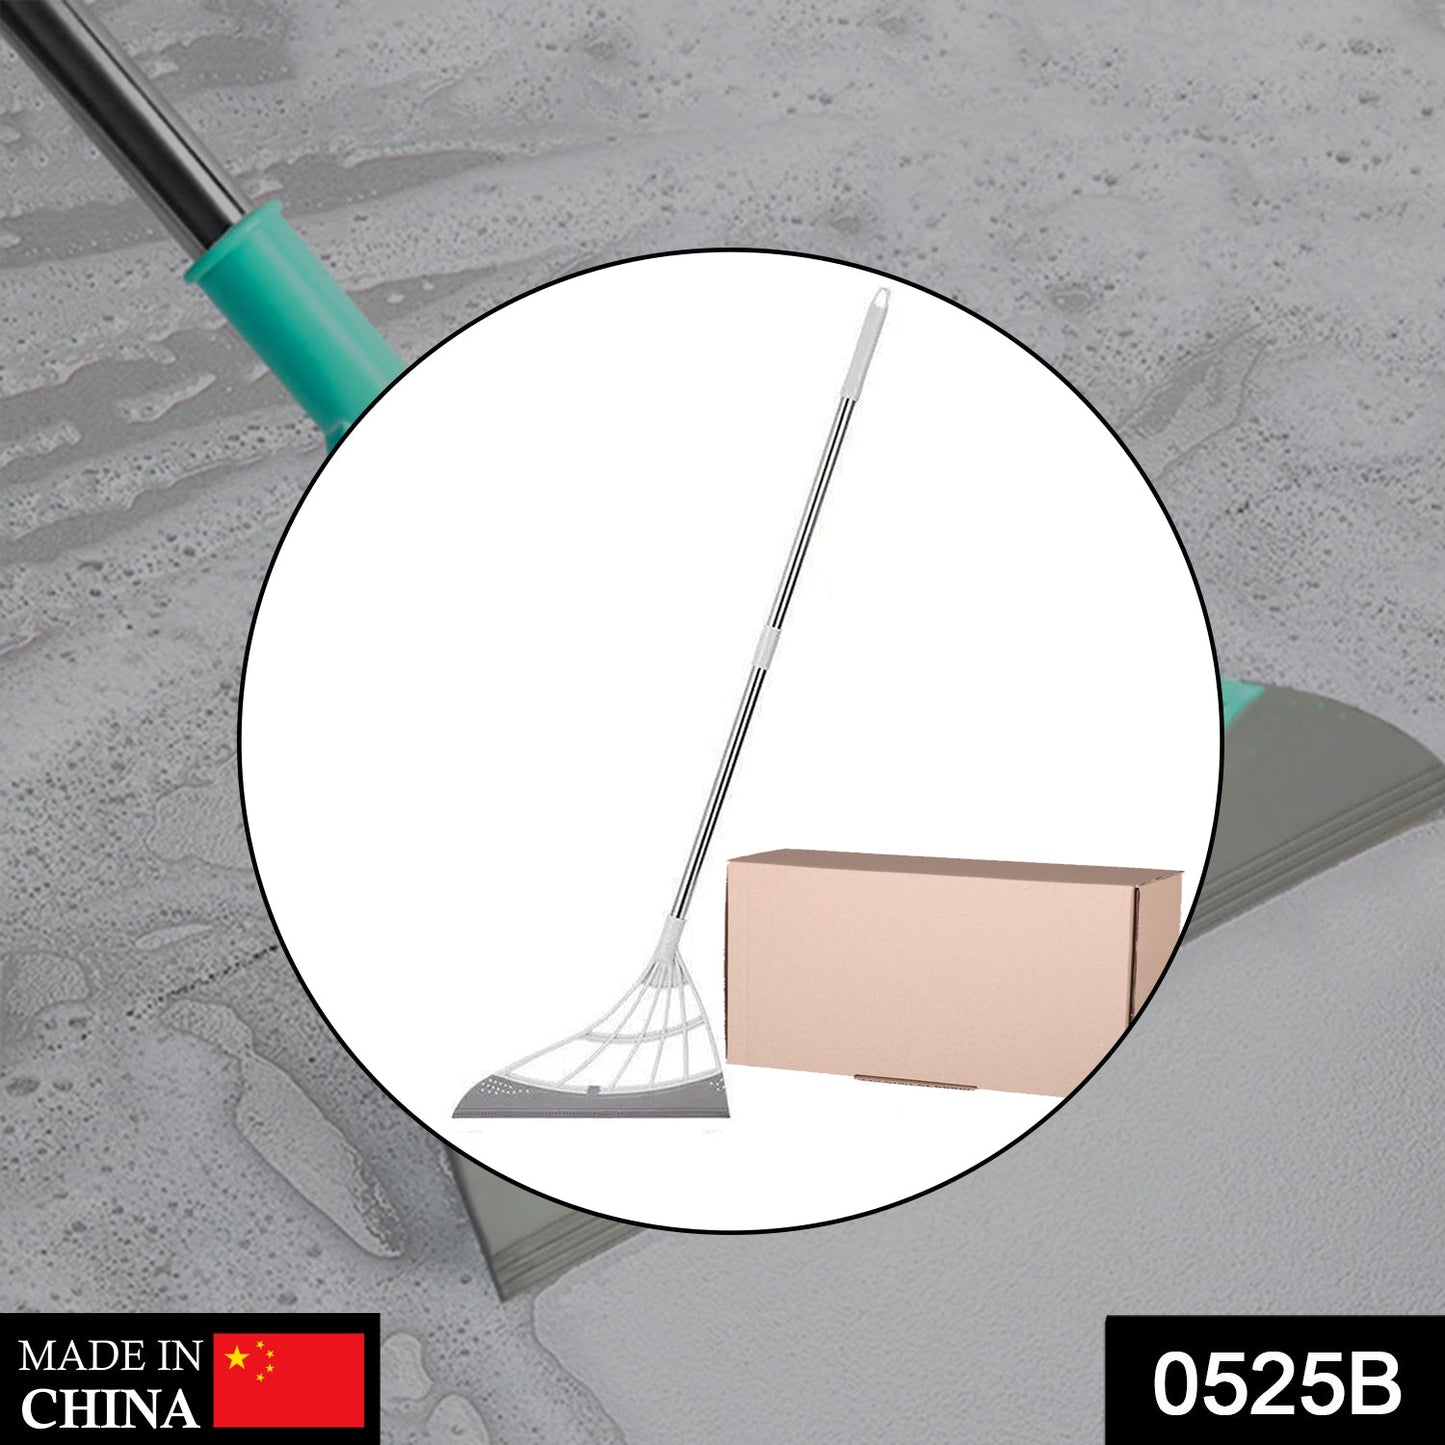 0525B Wiper for cleansing and wiping of all kinds of wet and dry floor surfaces.